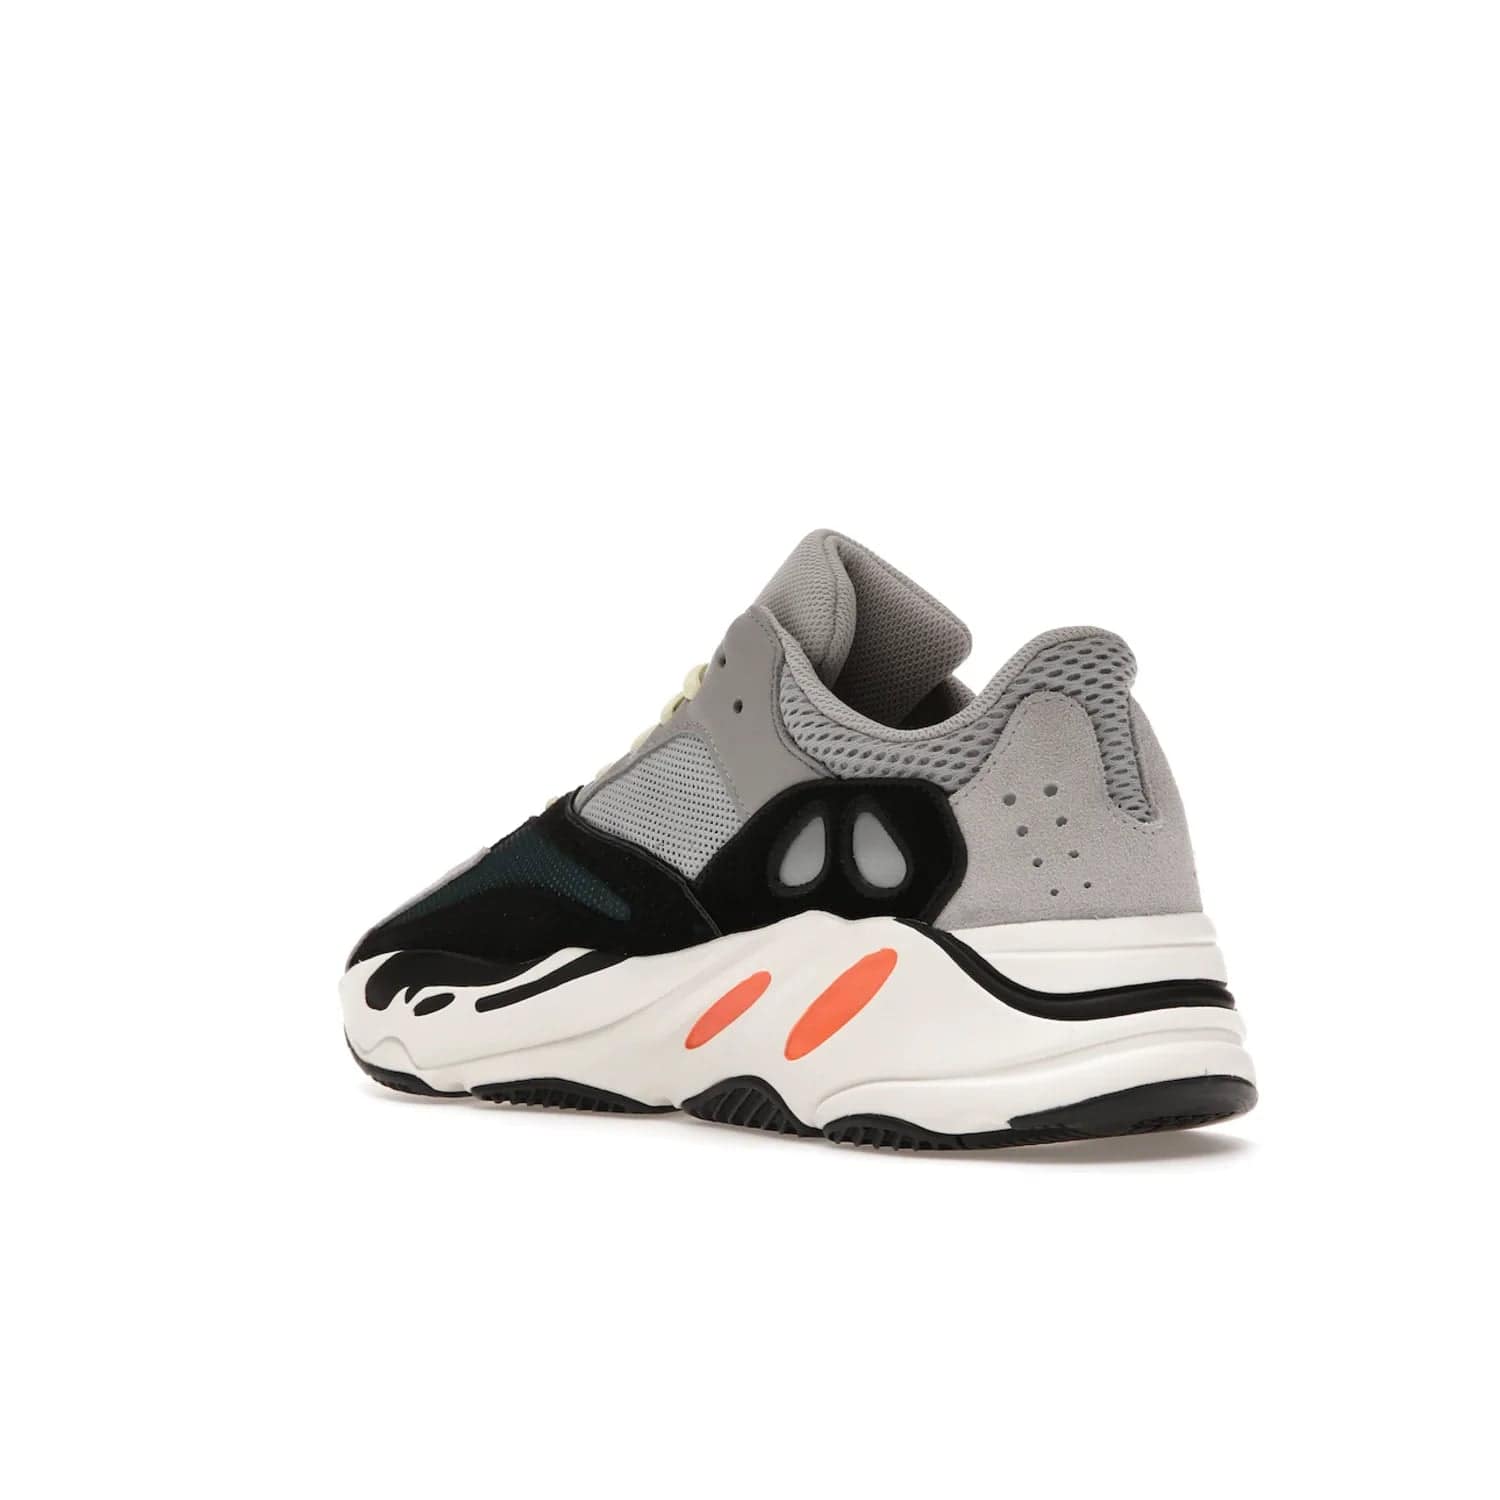 adidas Yeezy Boost 700 Wave Runner - Image 24 - Only at www.BallersClubKickz.com - Shop the iconic adidas Yeezy Boost 700 Wave Runner. Featuring grey mesh and leather upper, black suede overlays, teal mesh underlays, and signature Boost sole. Be bold & make a statement.